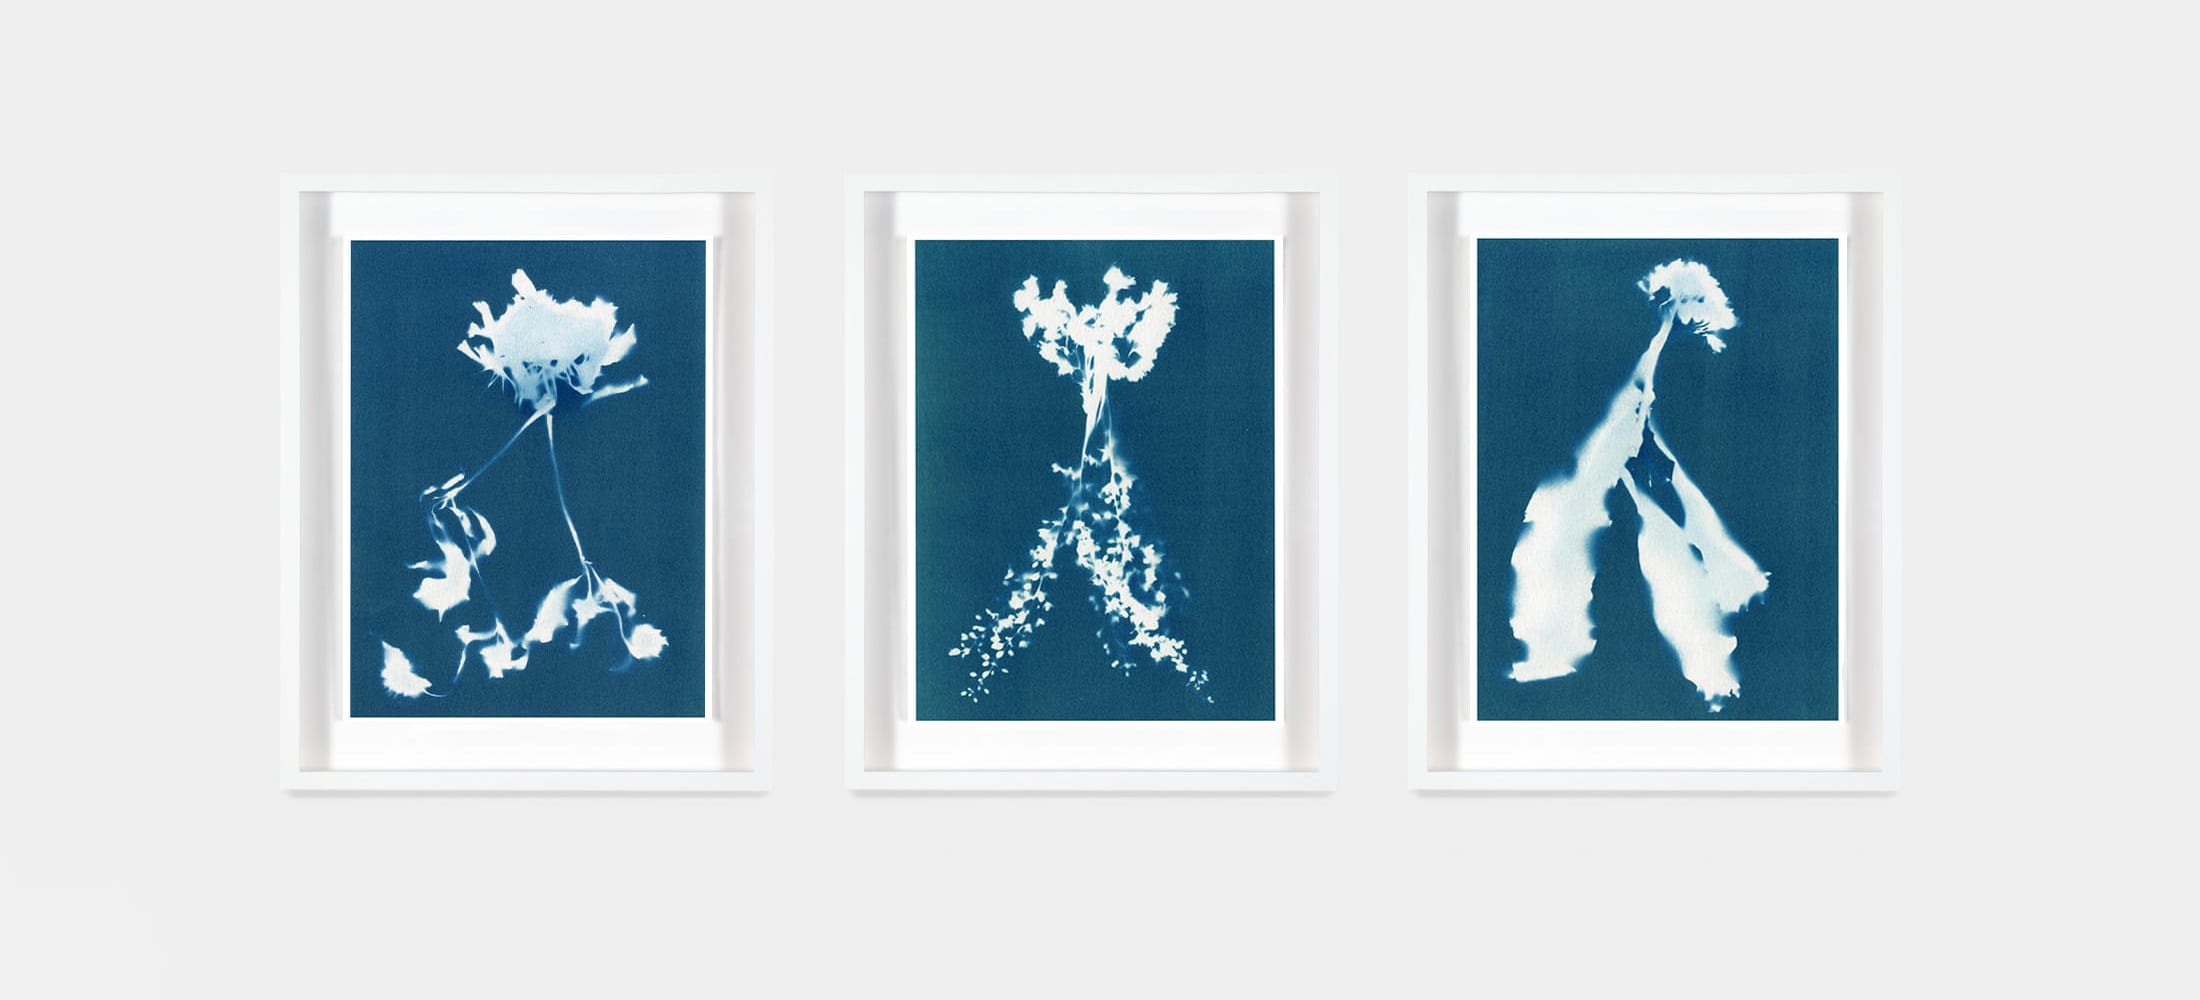 Collecting: Small-scale cyanotypes by Janelle Lynch